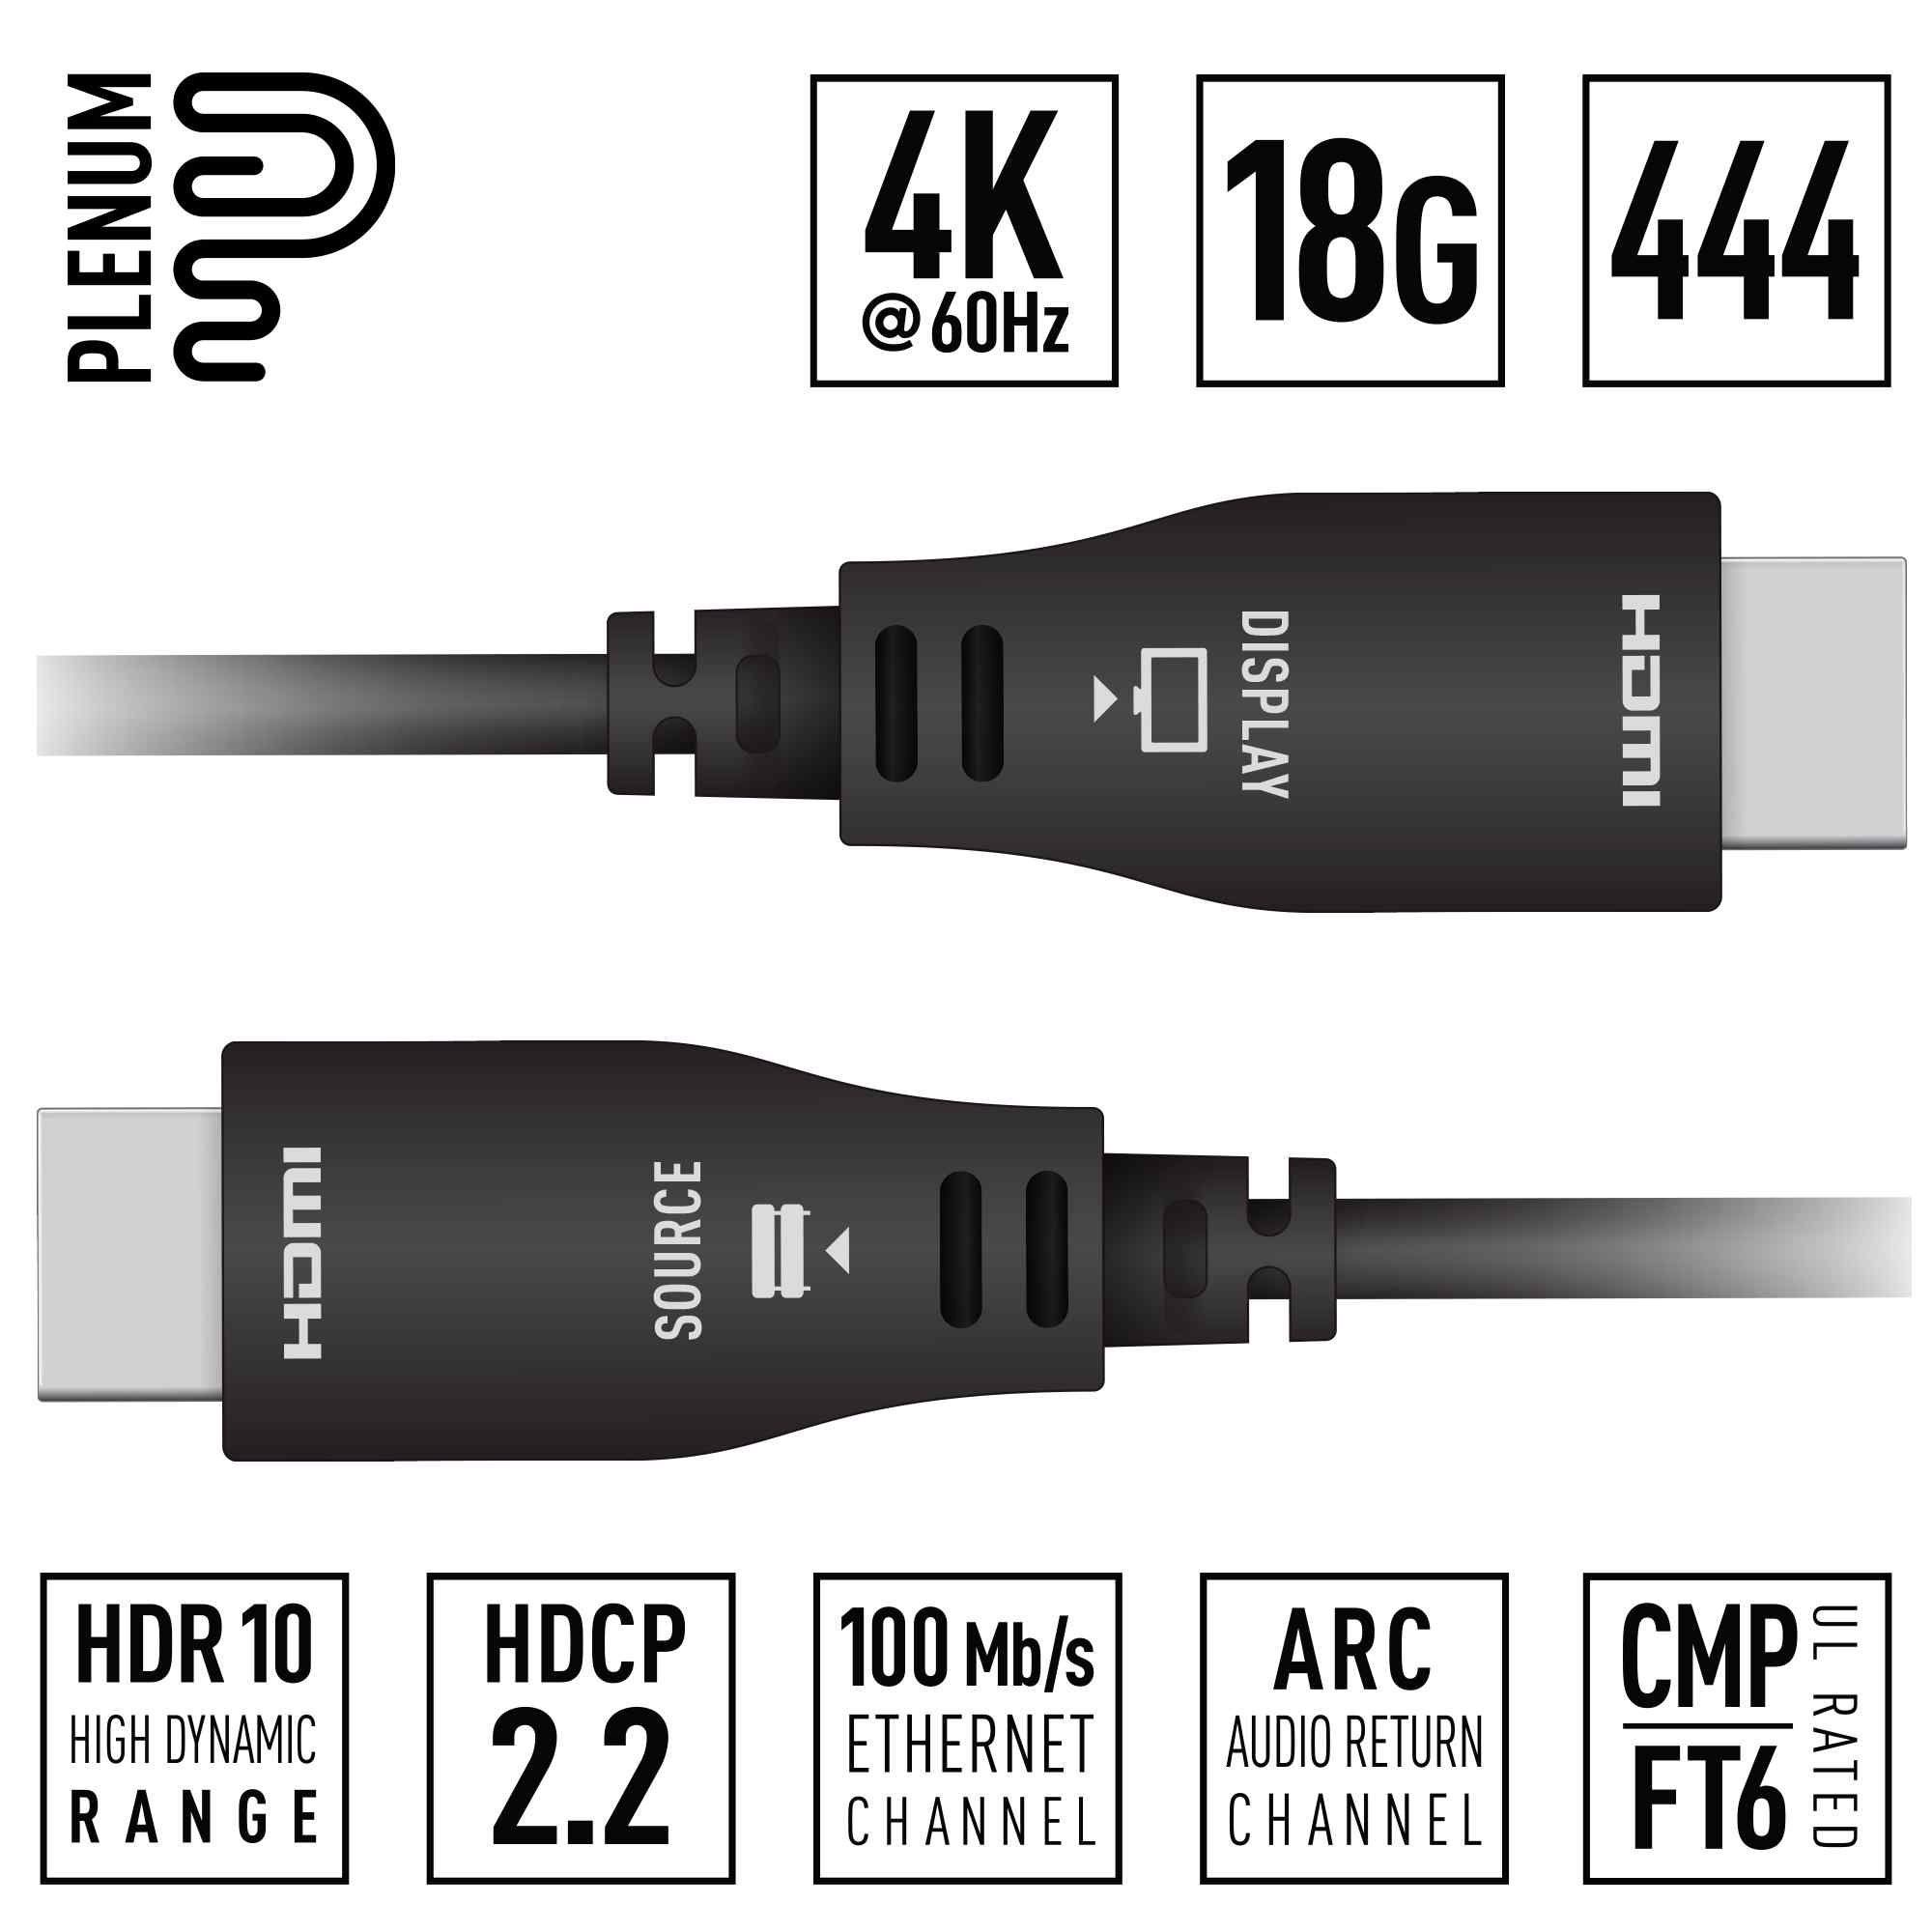 Key Digital 328FT (100M) 4K@60Hz/444/18G - Plenum Active Optical HDMI Cable, CMP/FT6 UL Rated - KD-AOCH328P